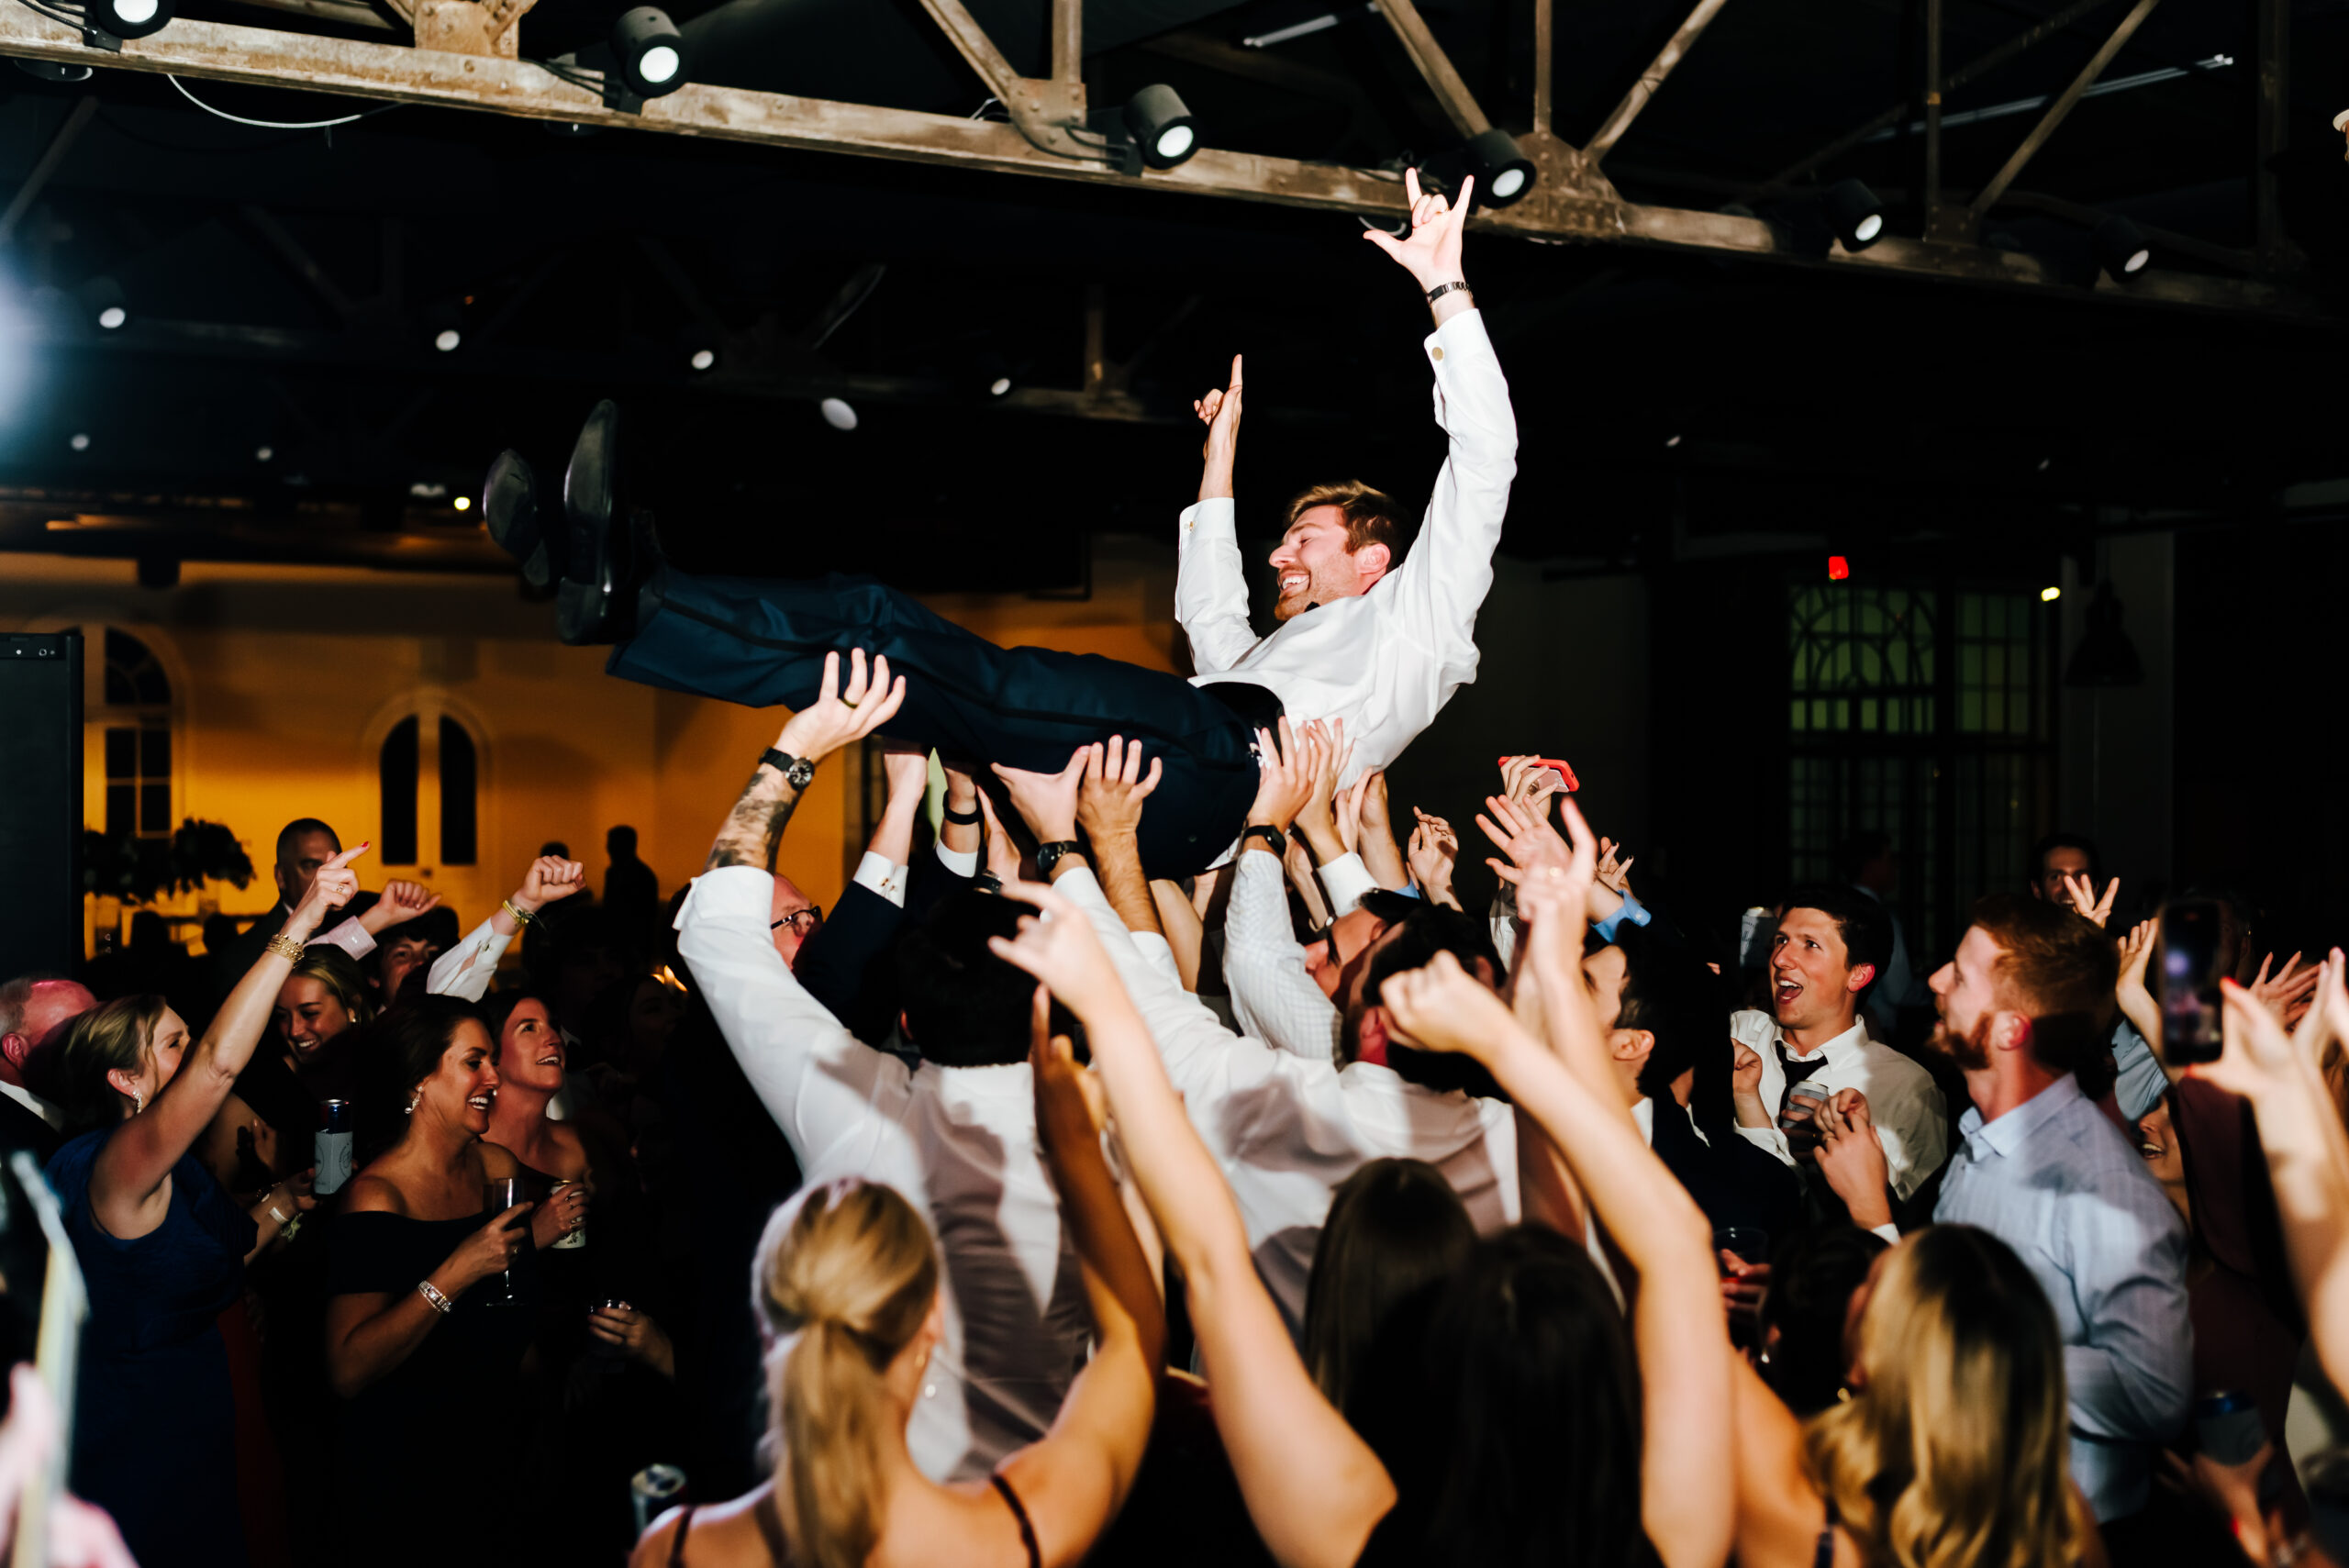 A groom crowd surfs at his wedding reception